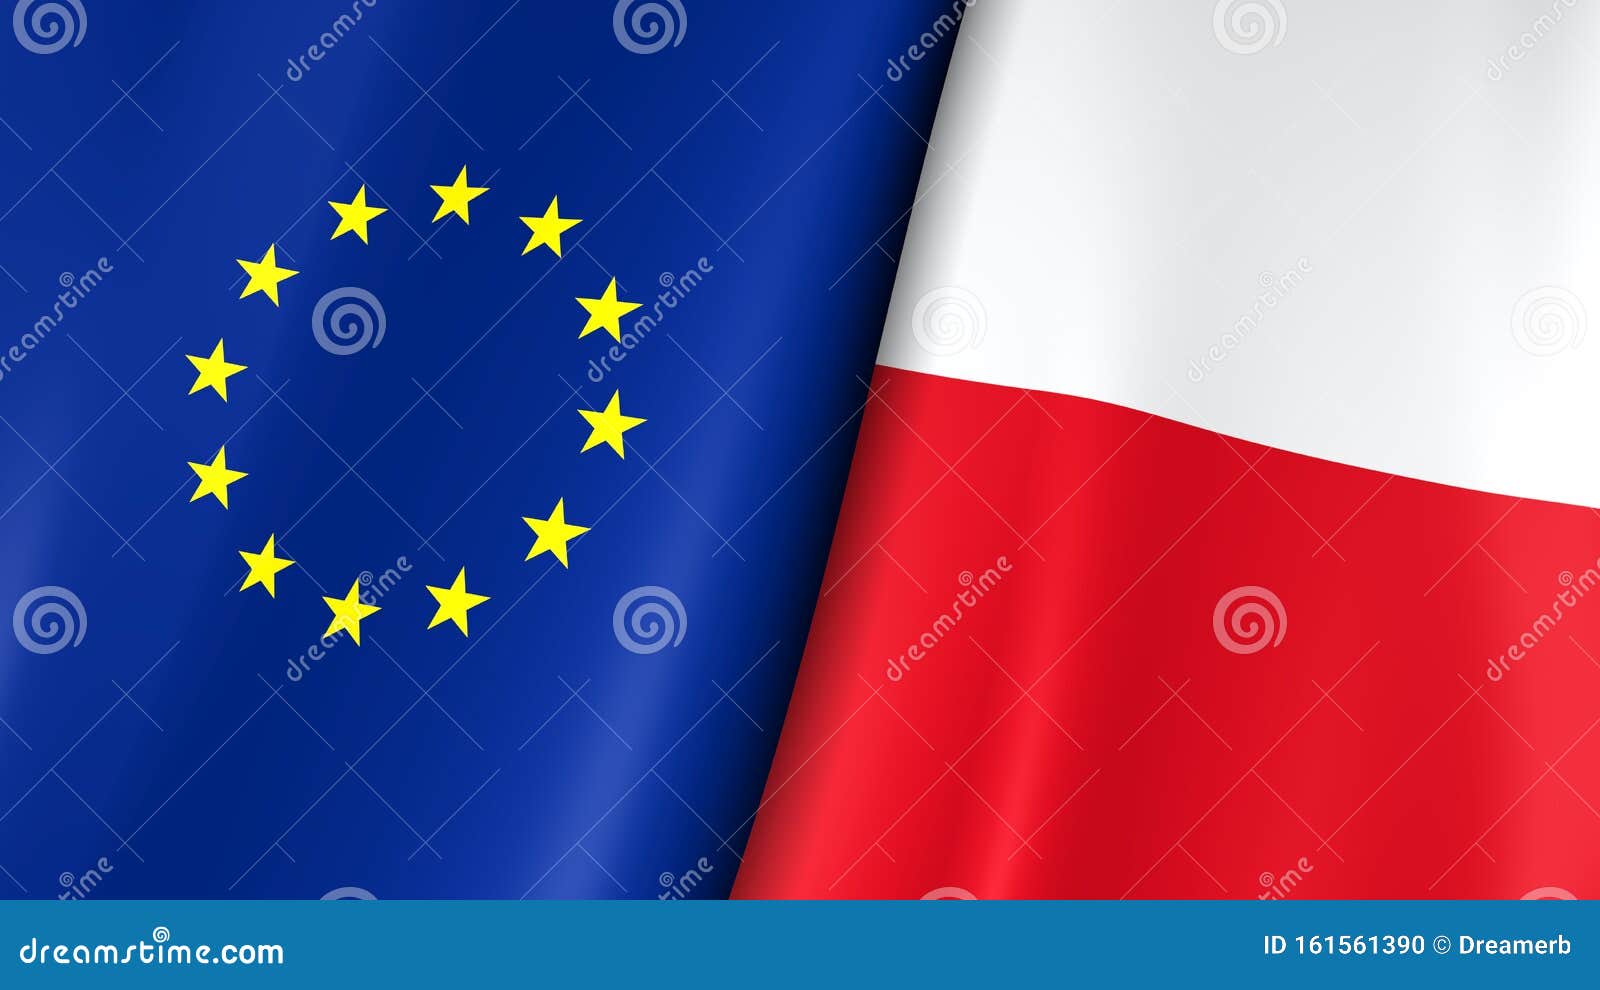 European Flag And Flag Of Poland. Yellow Stars On A Blue. White And Red. Council Of Europe ...